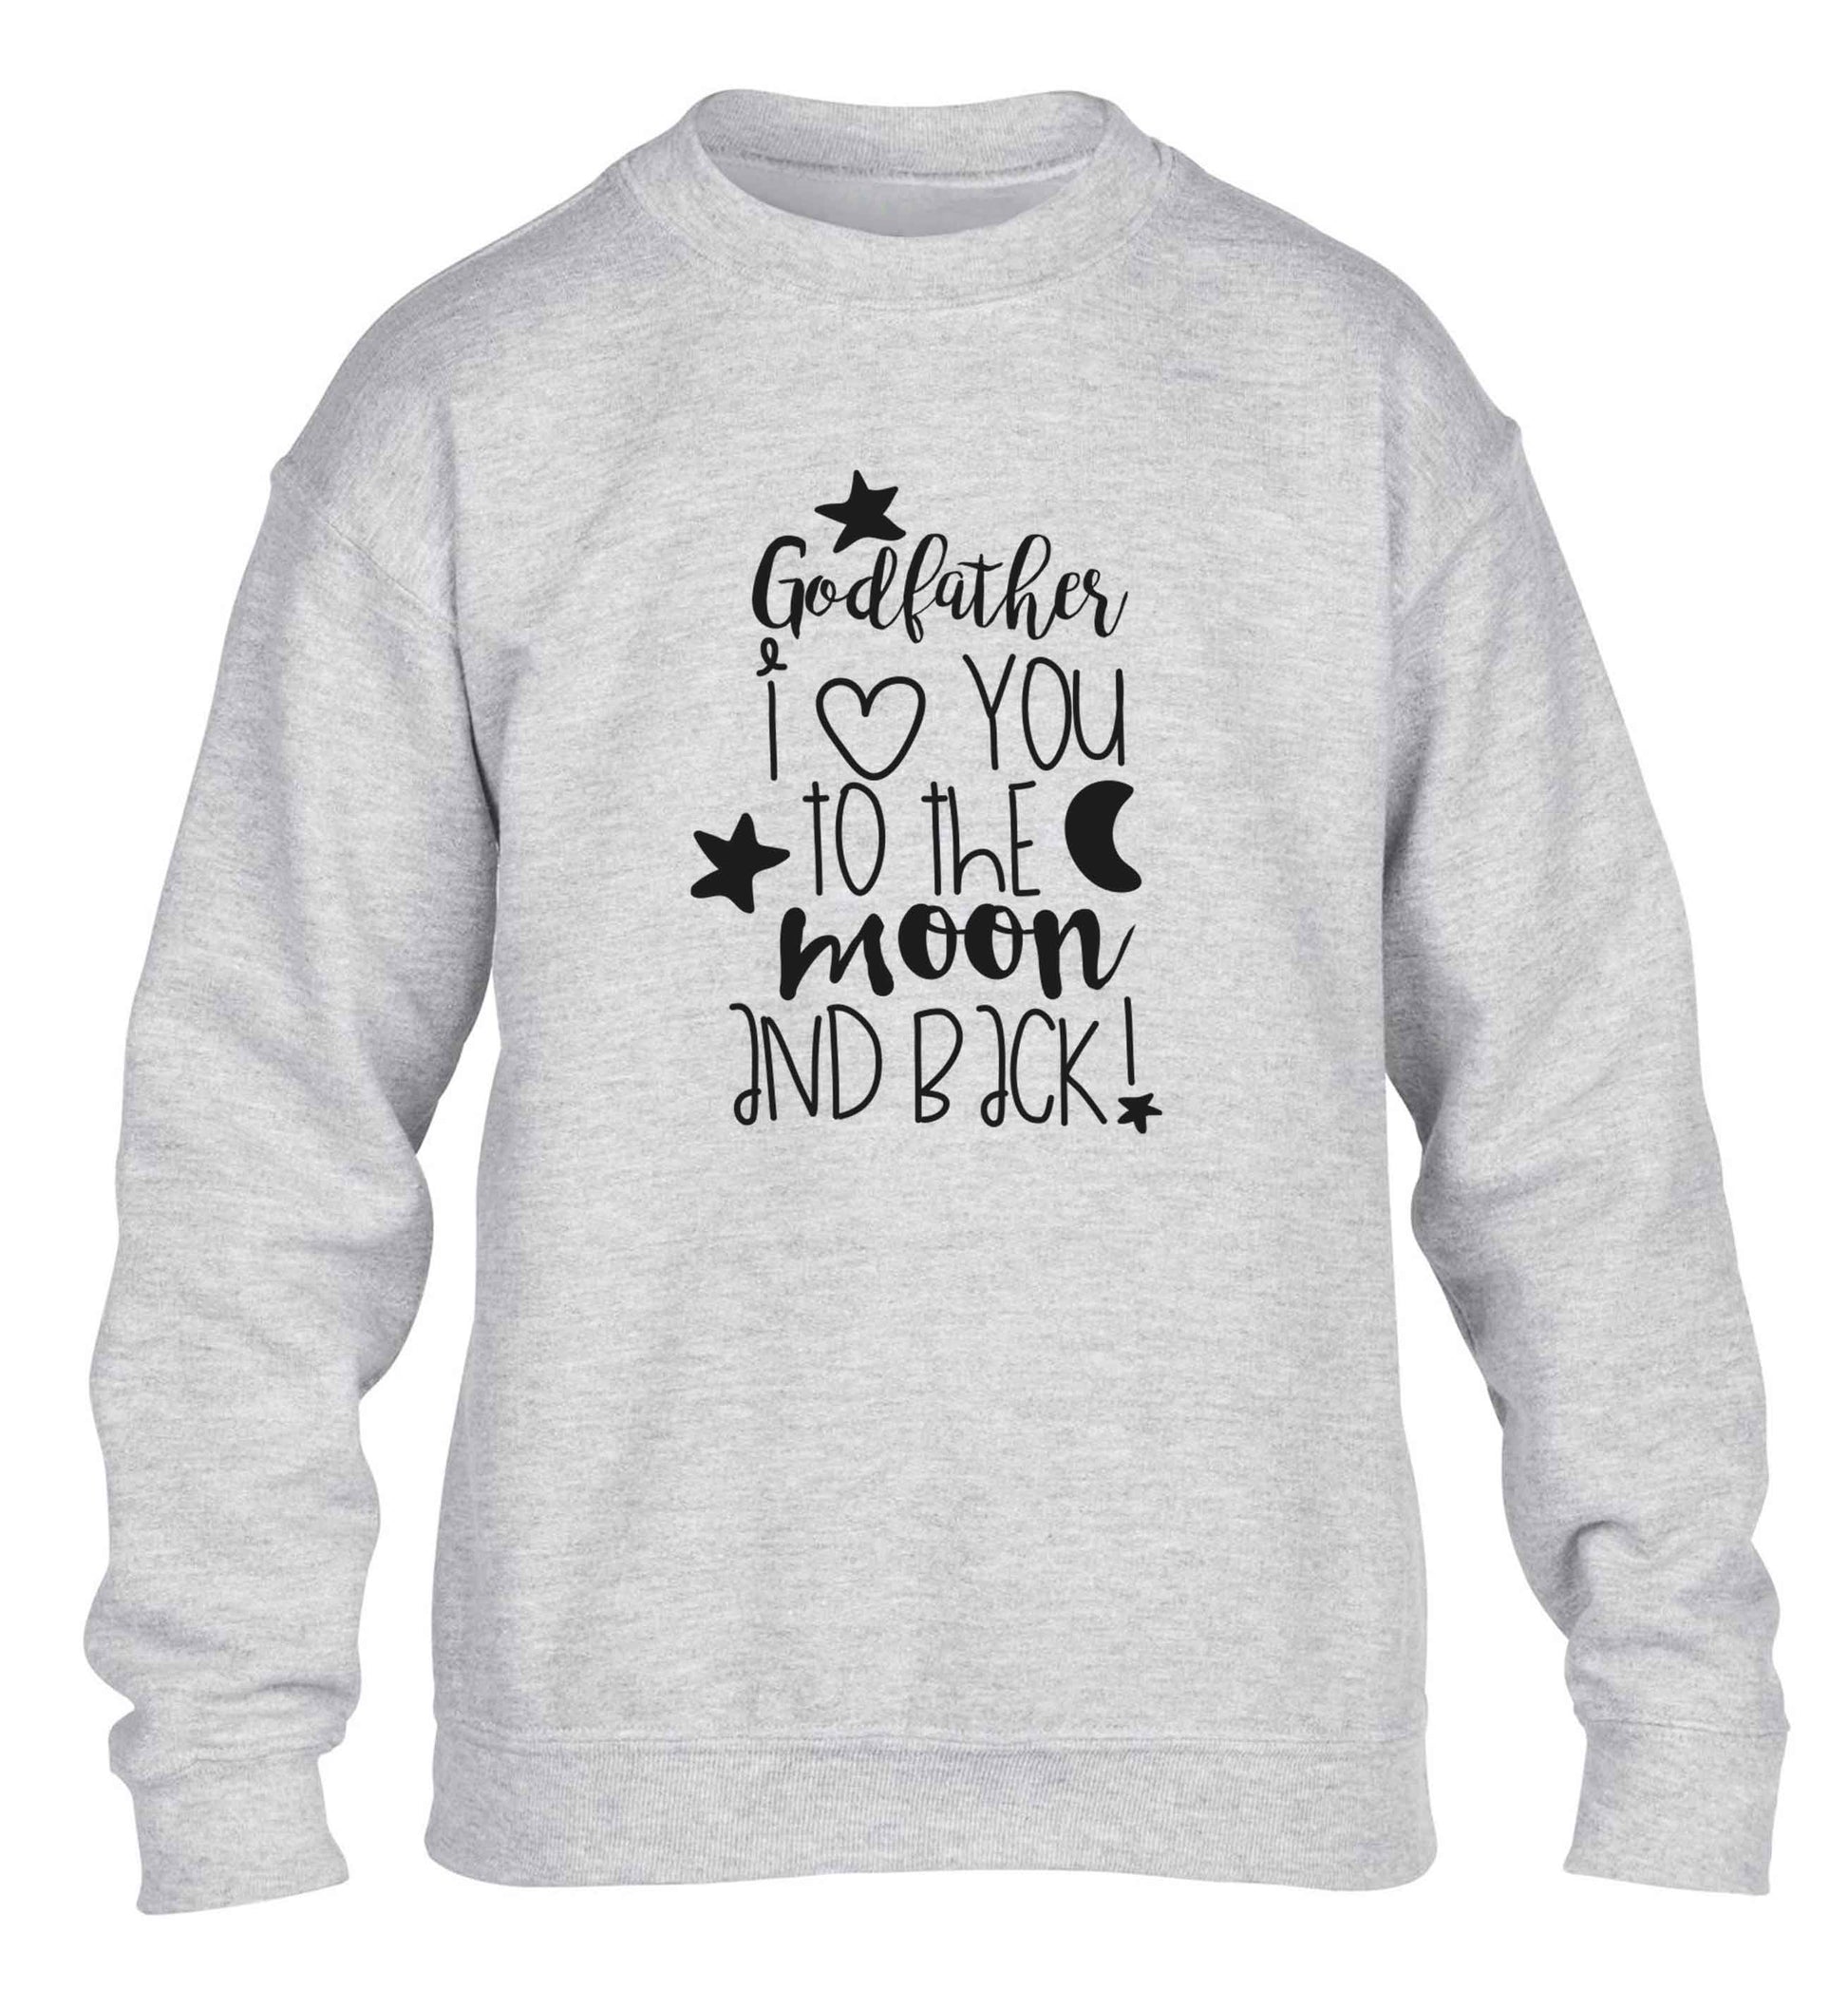 Godfather I love you to the moon and back children's grey sweater 12-13 Years